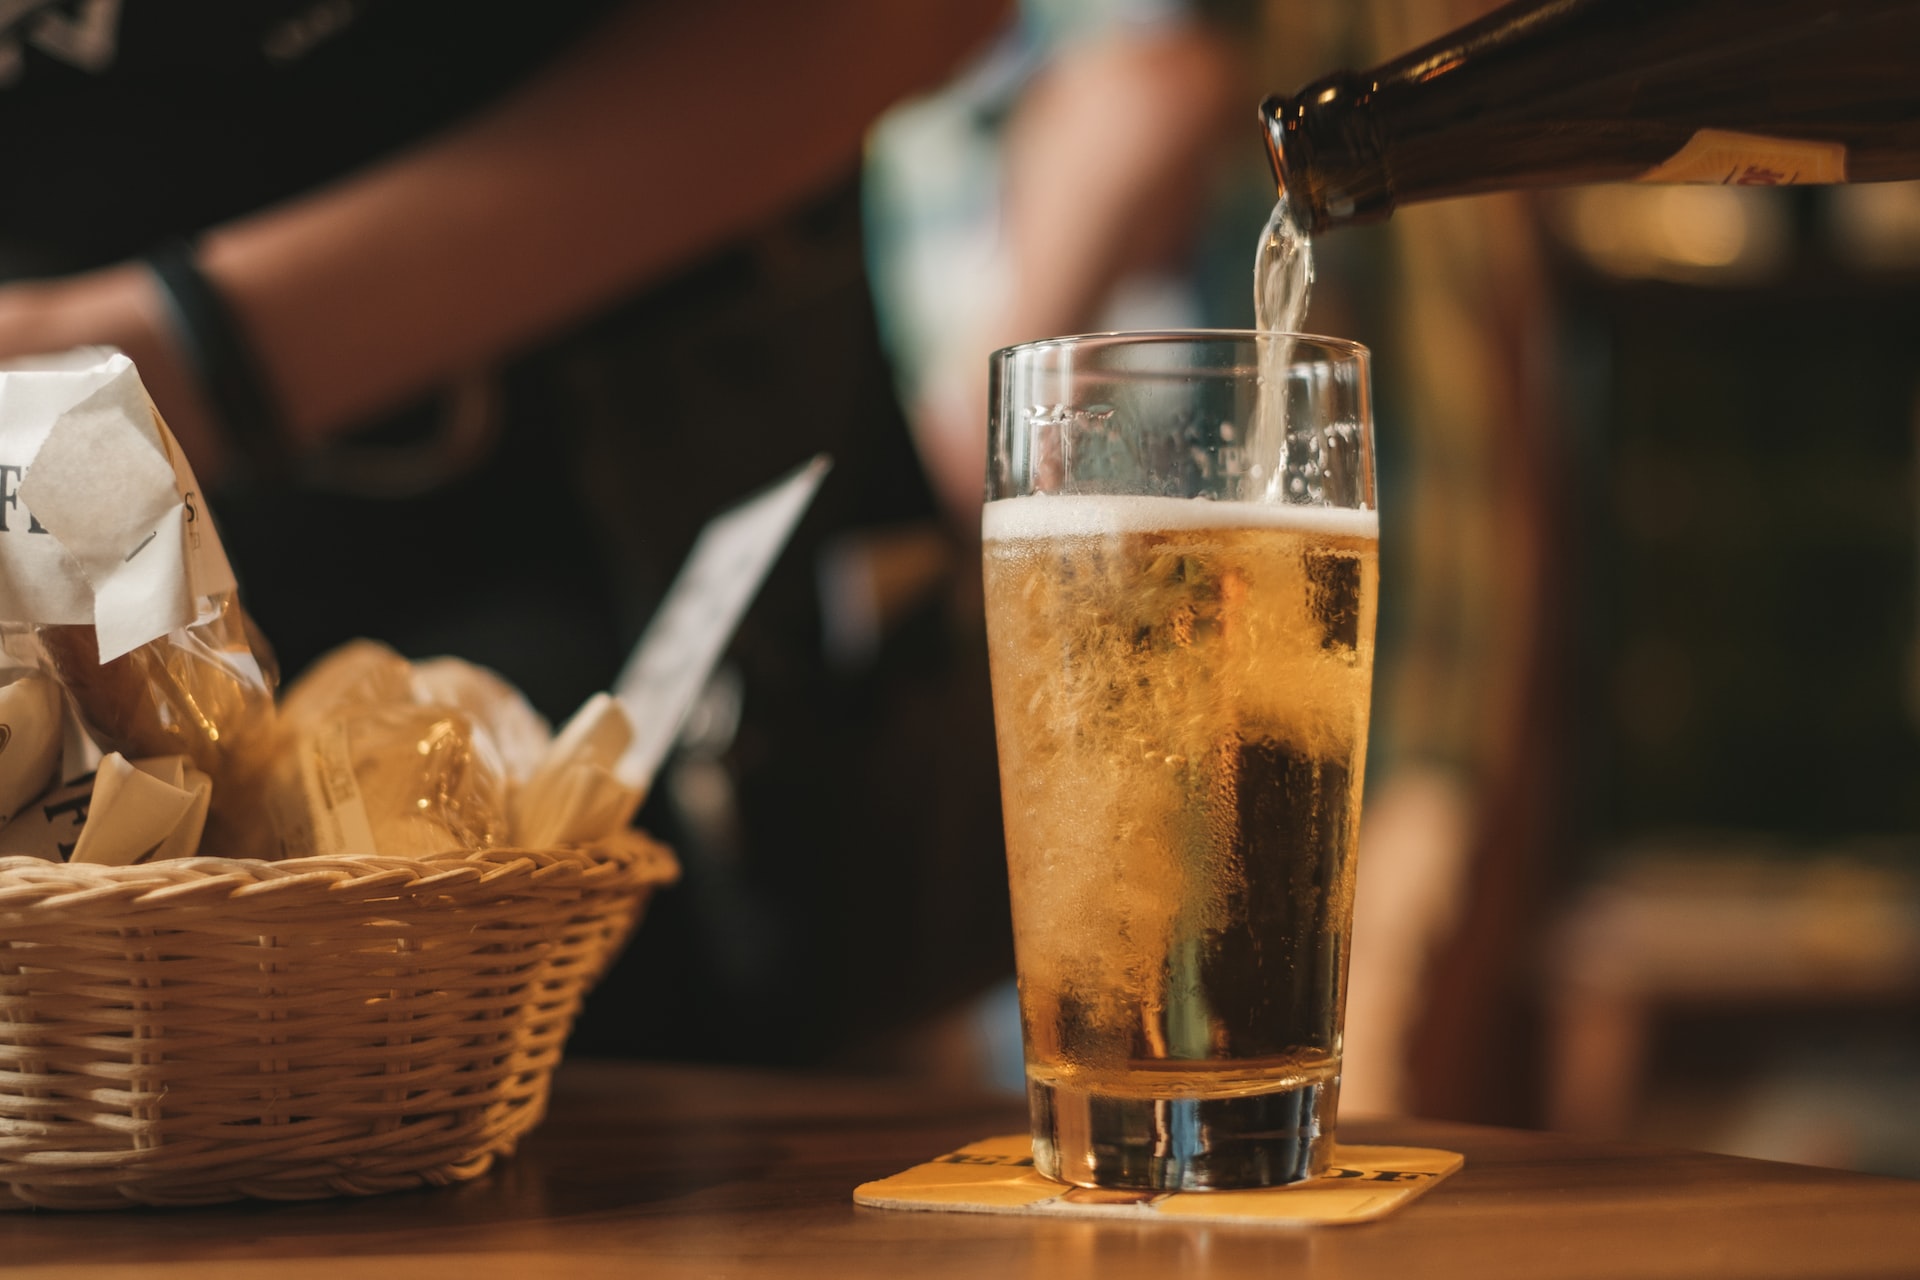 The Truth About Non-Alcoholic Beer and Pregnancy: The Risks, Benefits, and What You Need to Know